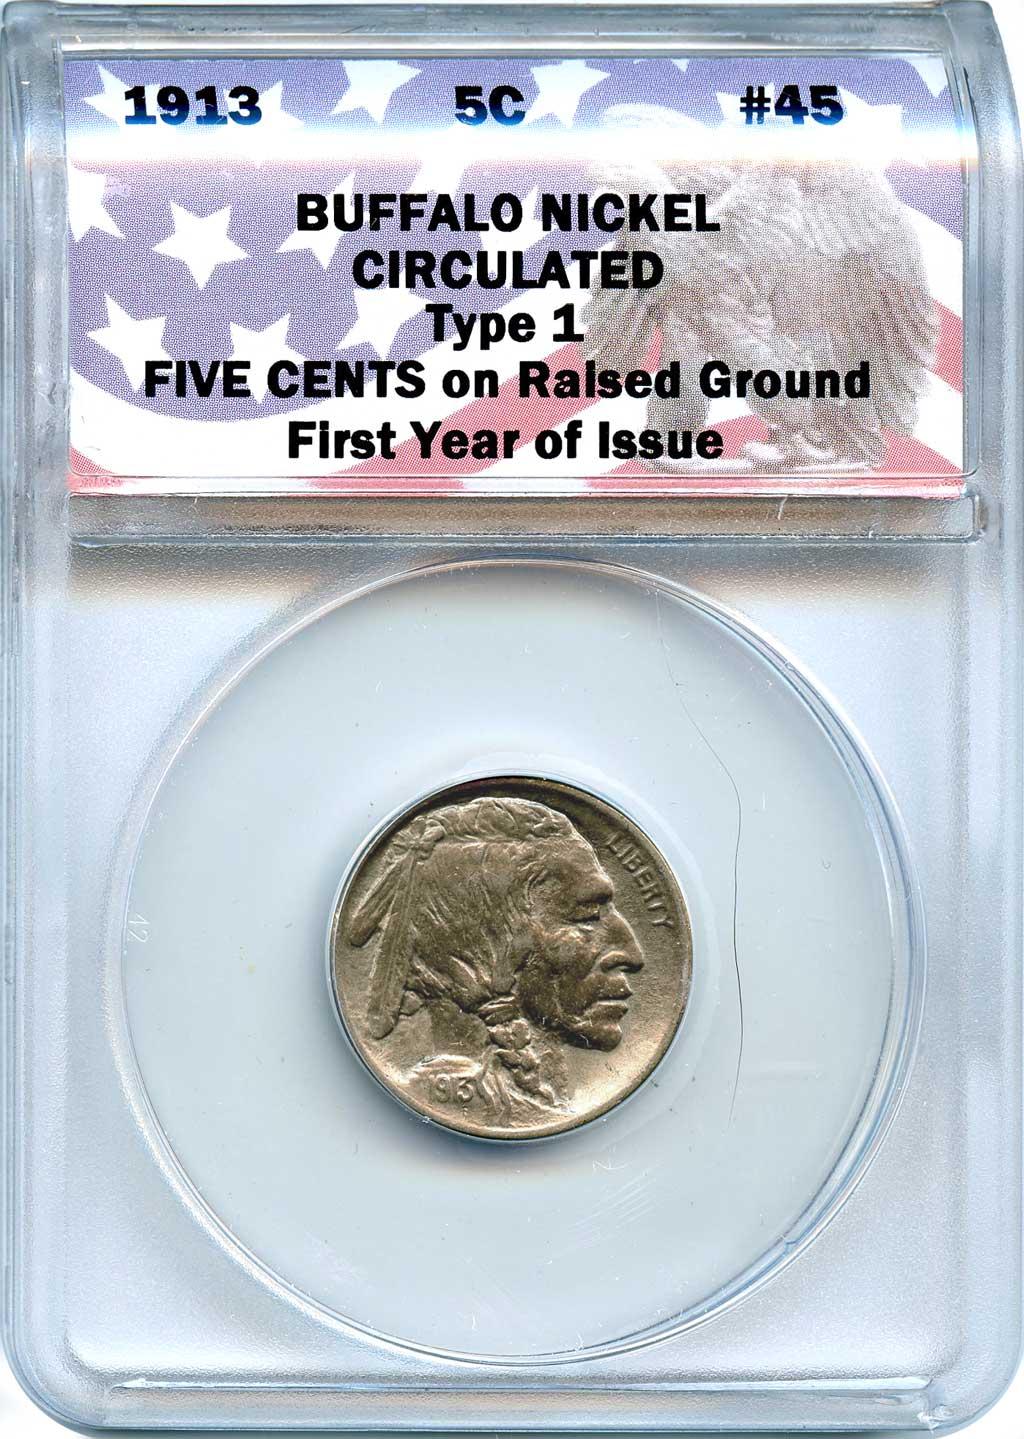 CollecTons Keepers #45: 1913 Type I Buffalo Nickel Certified in Exclusive ANACS Holder